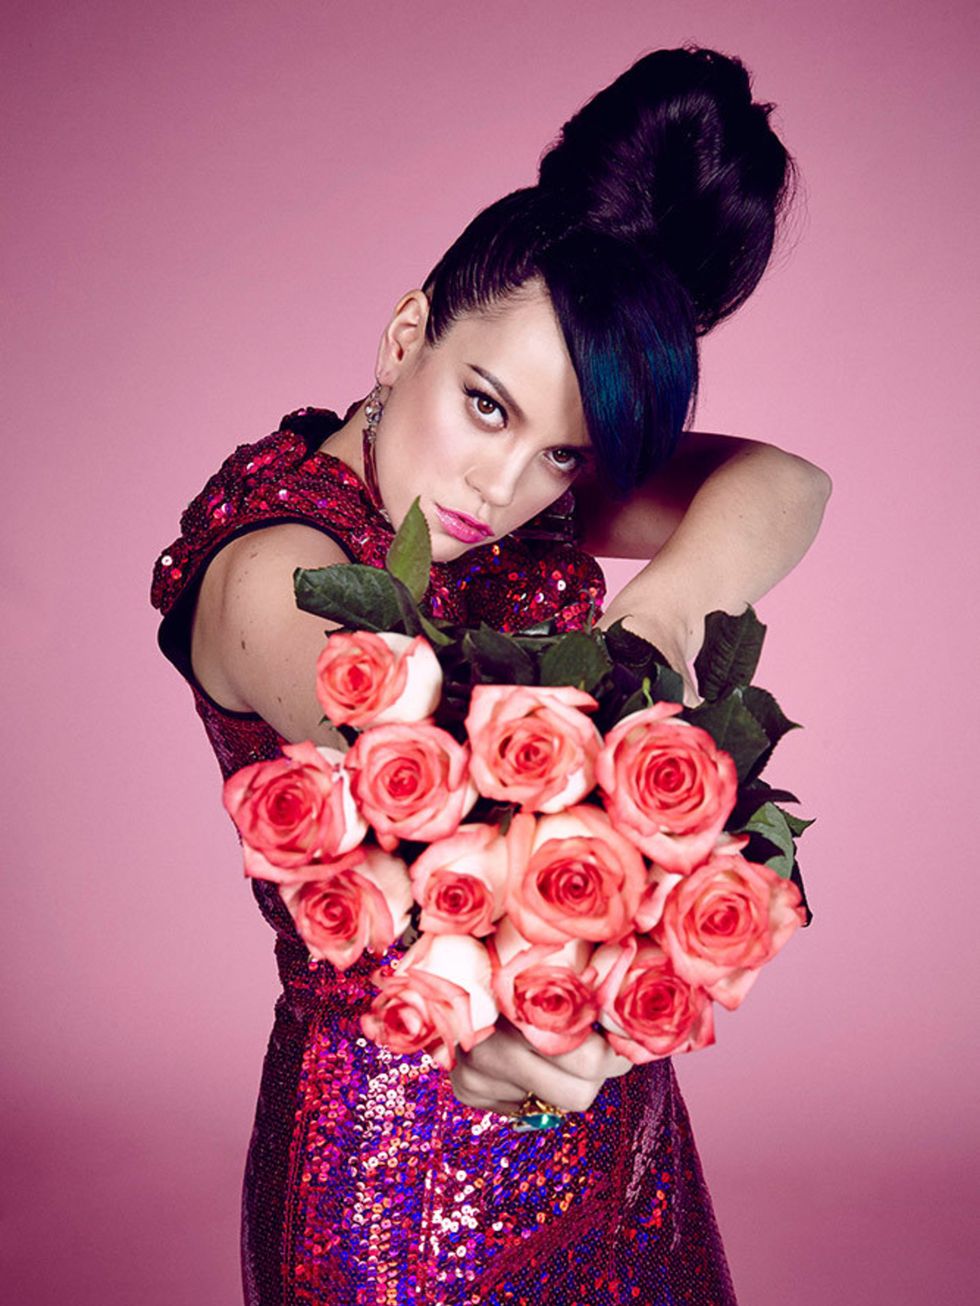 <p><strong>GIG: Lily Allen</strong></p>

<p>Sheezus walks! Back from circuiting the festival scene, touring with Miley and presumably fresh from the BLEACH London hair salon, Lily Allen will be running riot at the Brixton O2 Academy on Friday. Performing 